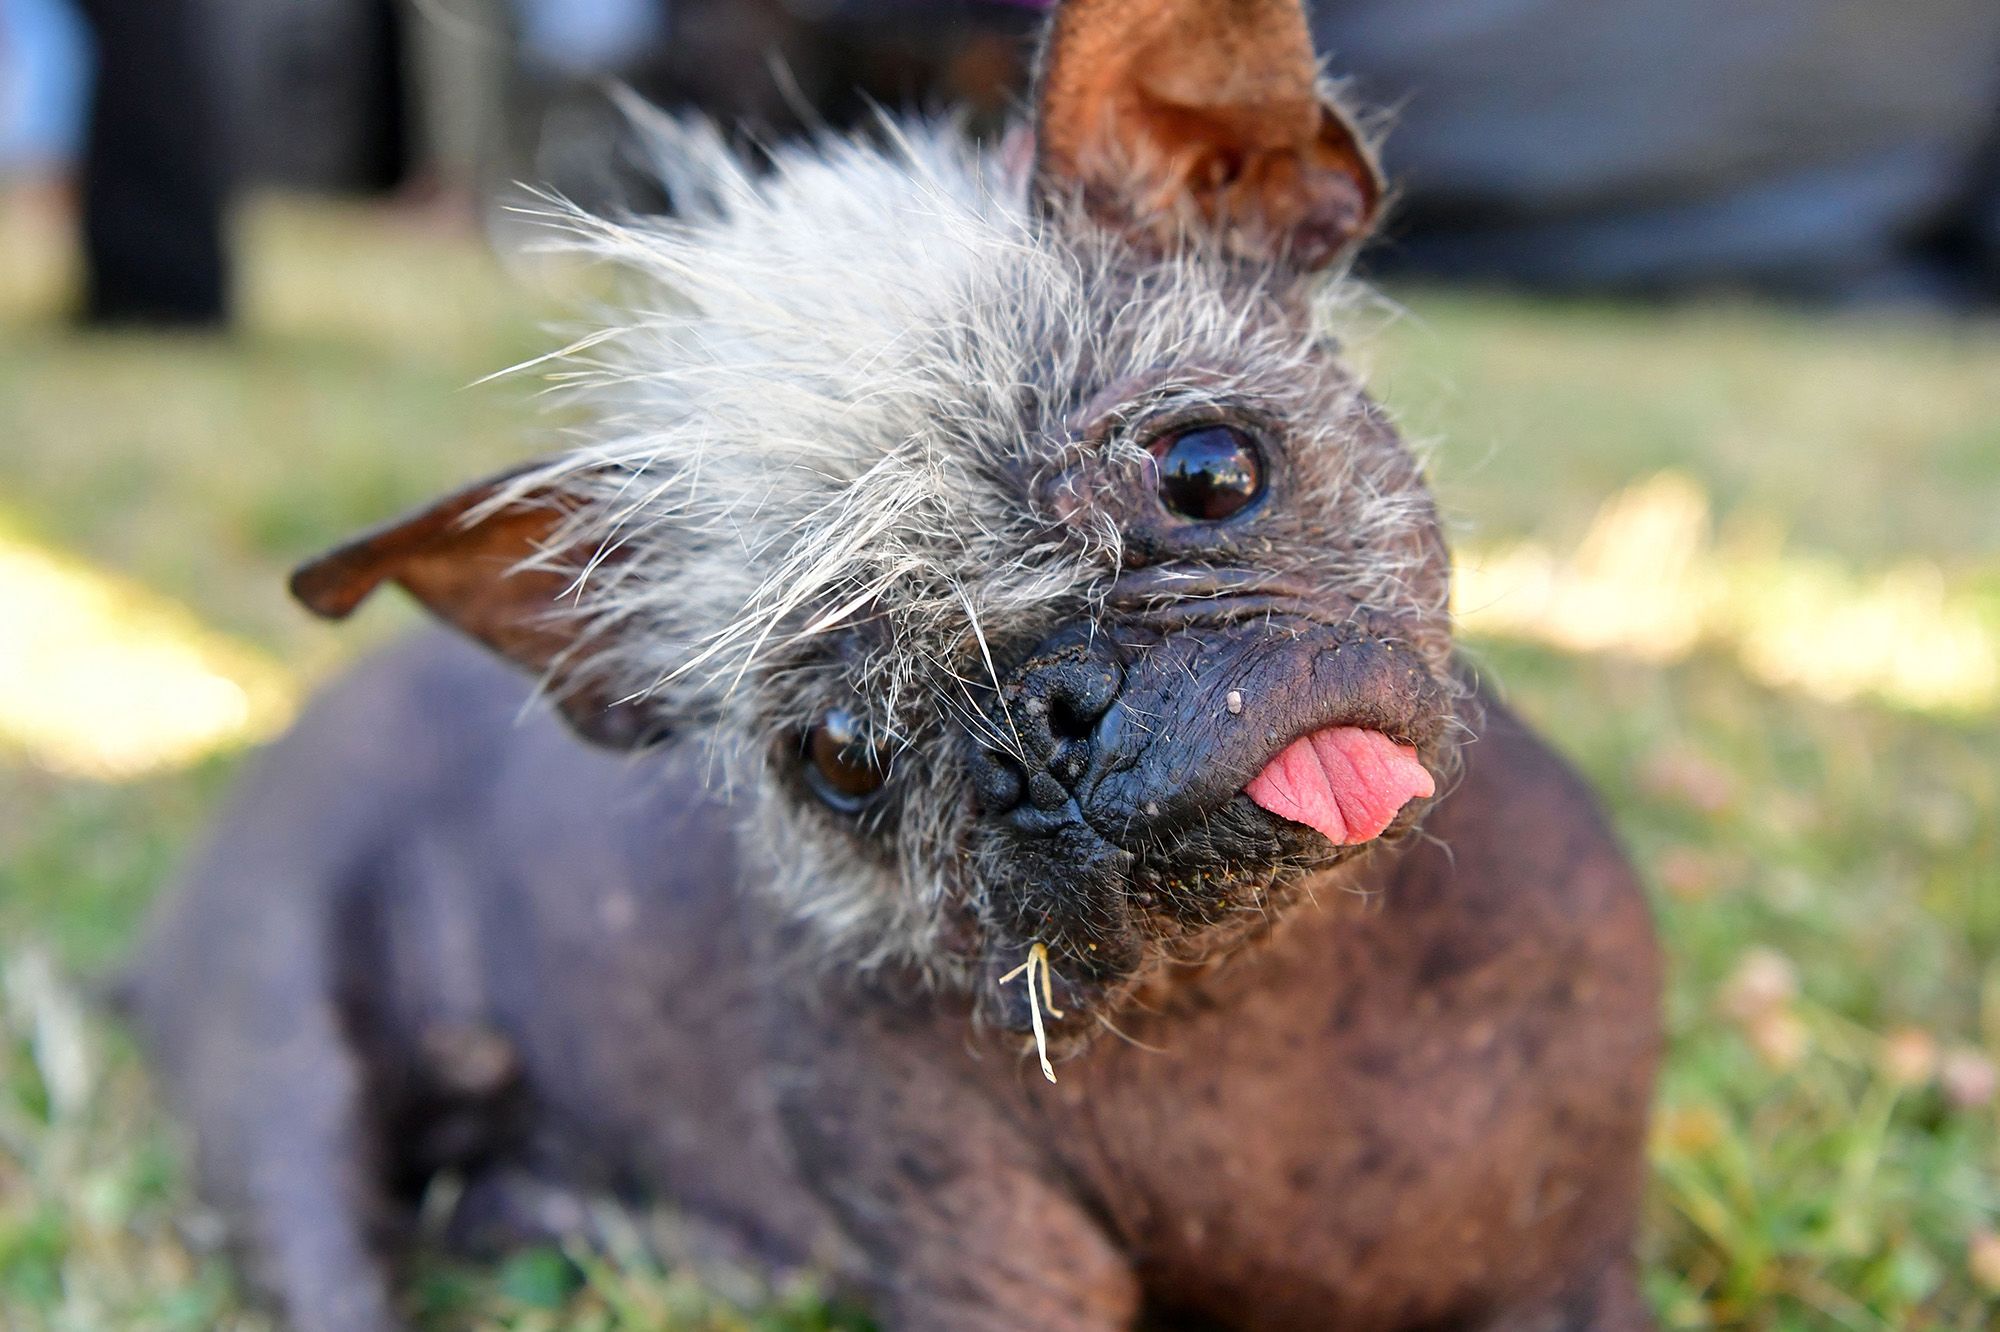 World's ugliest dog competition is officially accepting entries | CNN